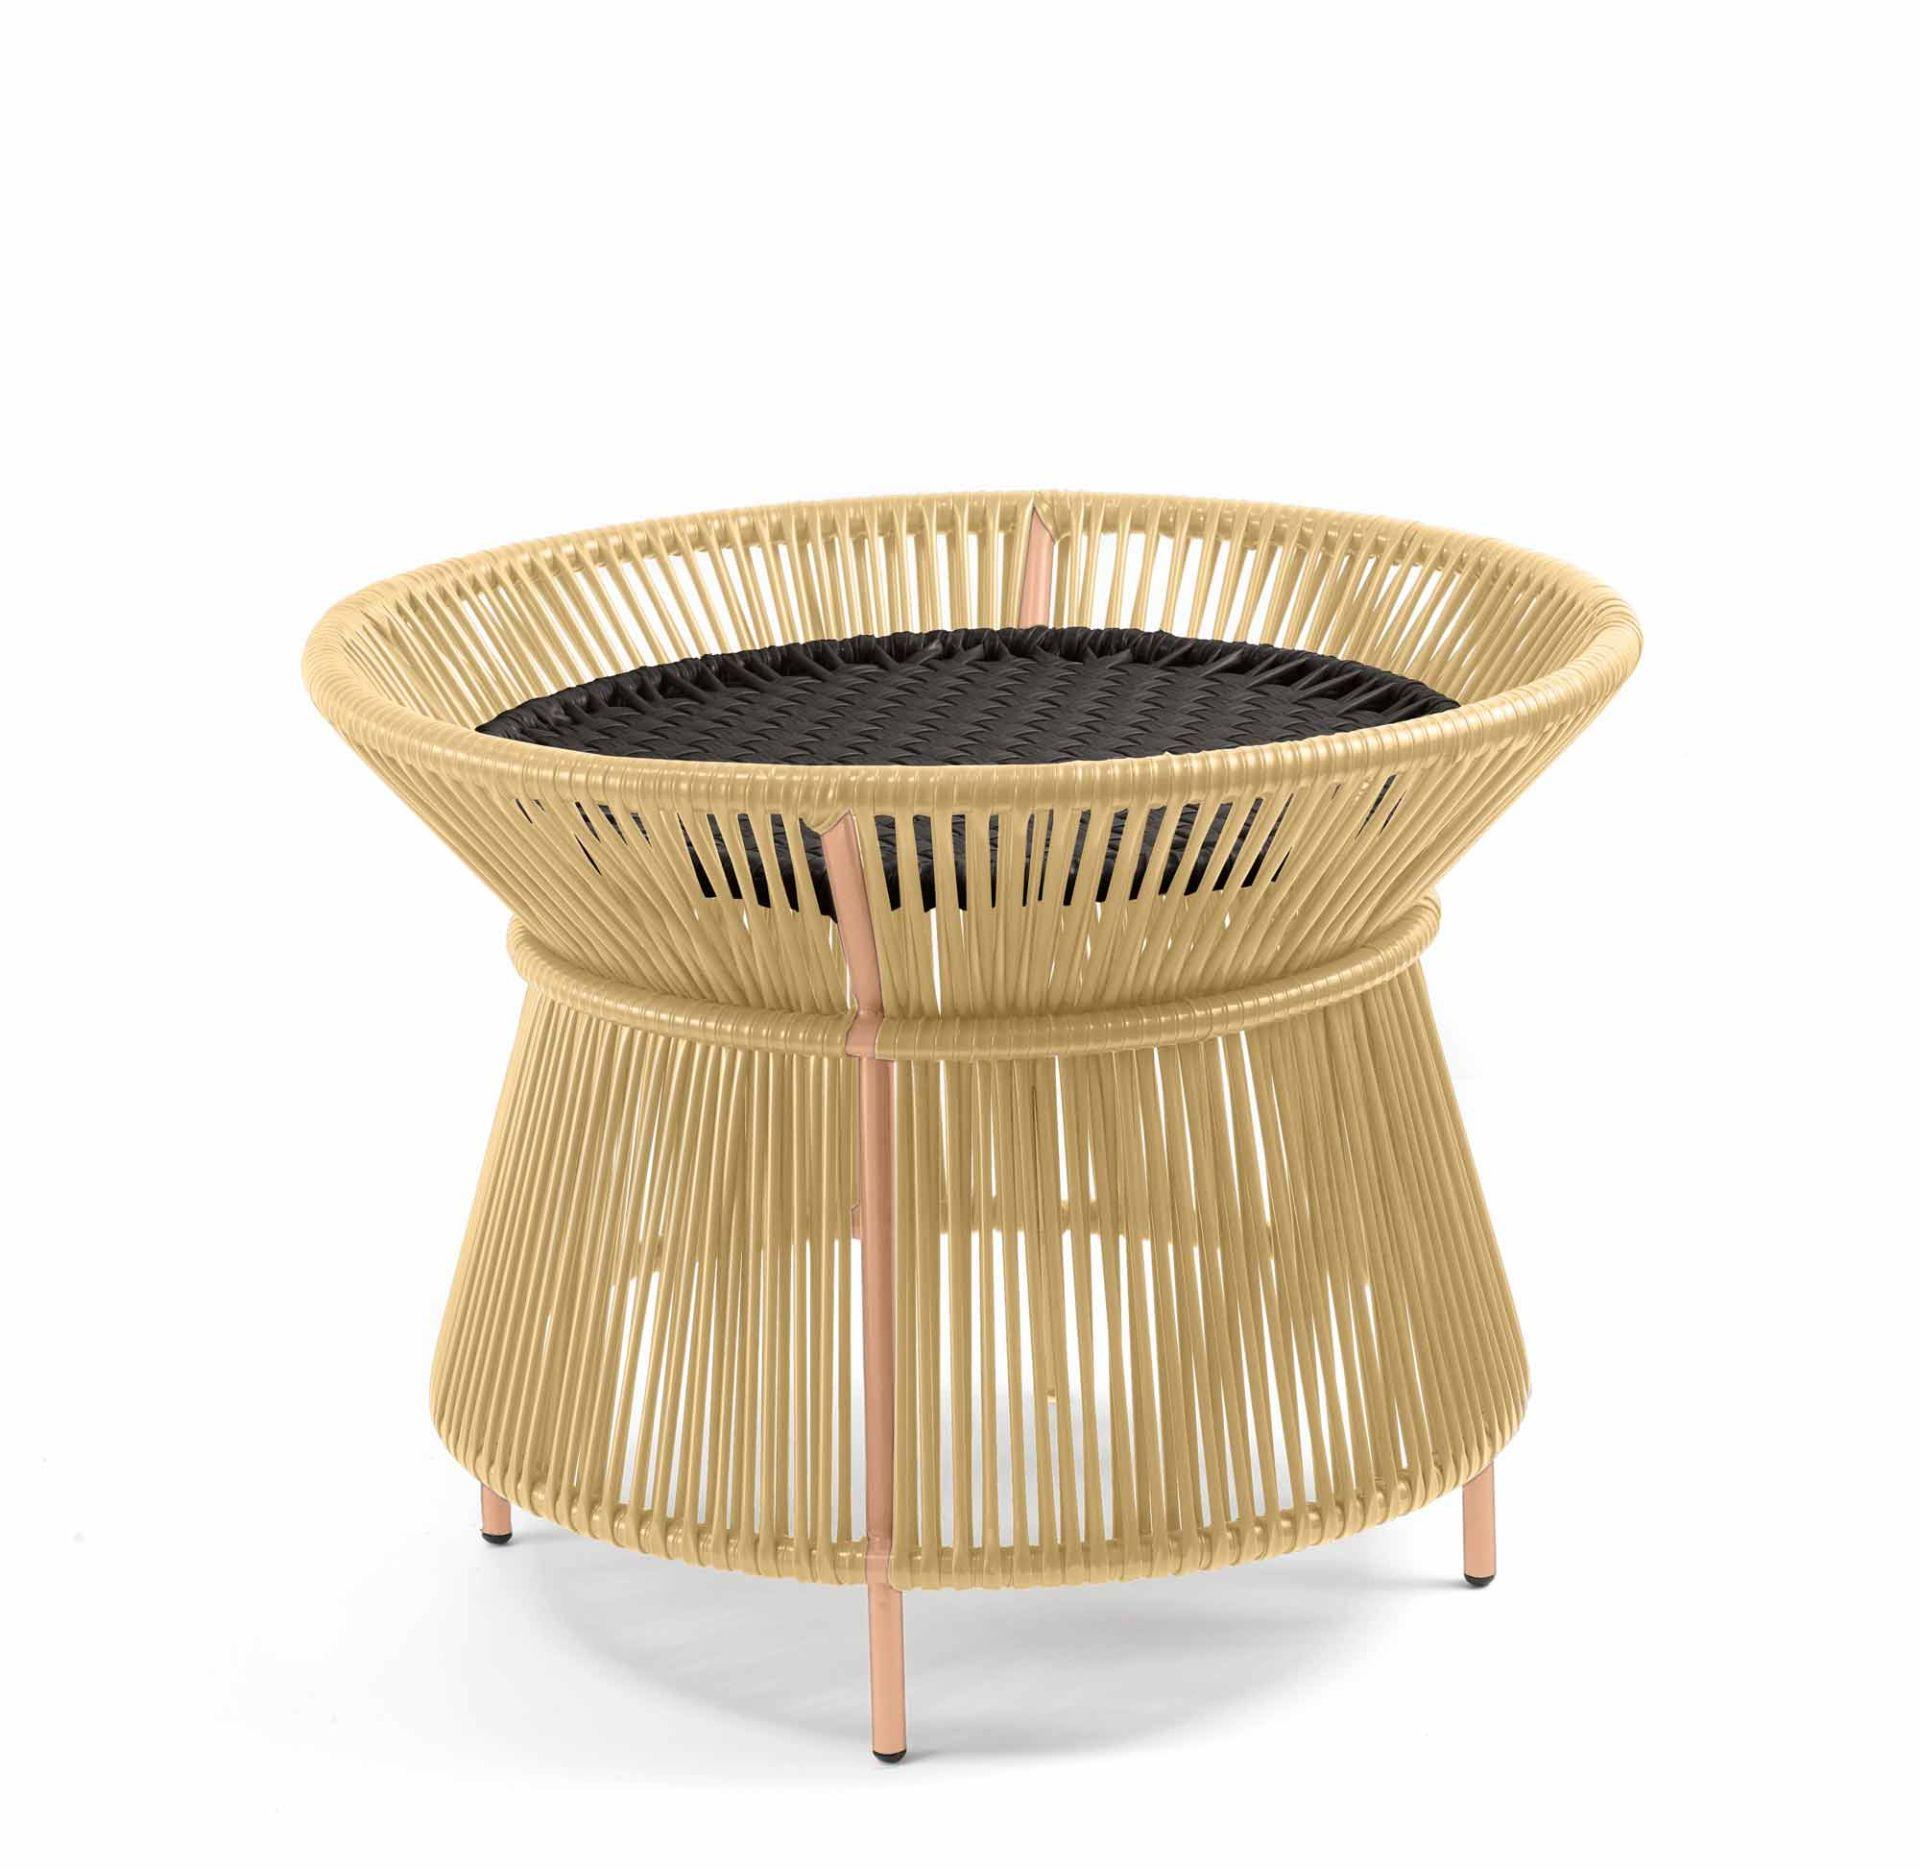 The Caribe Chic Basket Table is an elegant design by Sebastian Herkner and can be used inside and outdoors. It’s part of our Caribe Chic collection, featuring an intricate hand-woven webbing in contrasting earthy, muted shades. The pieces and